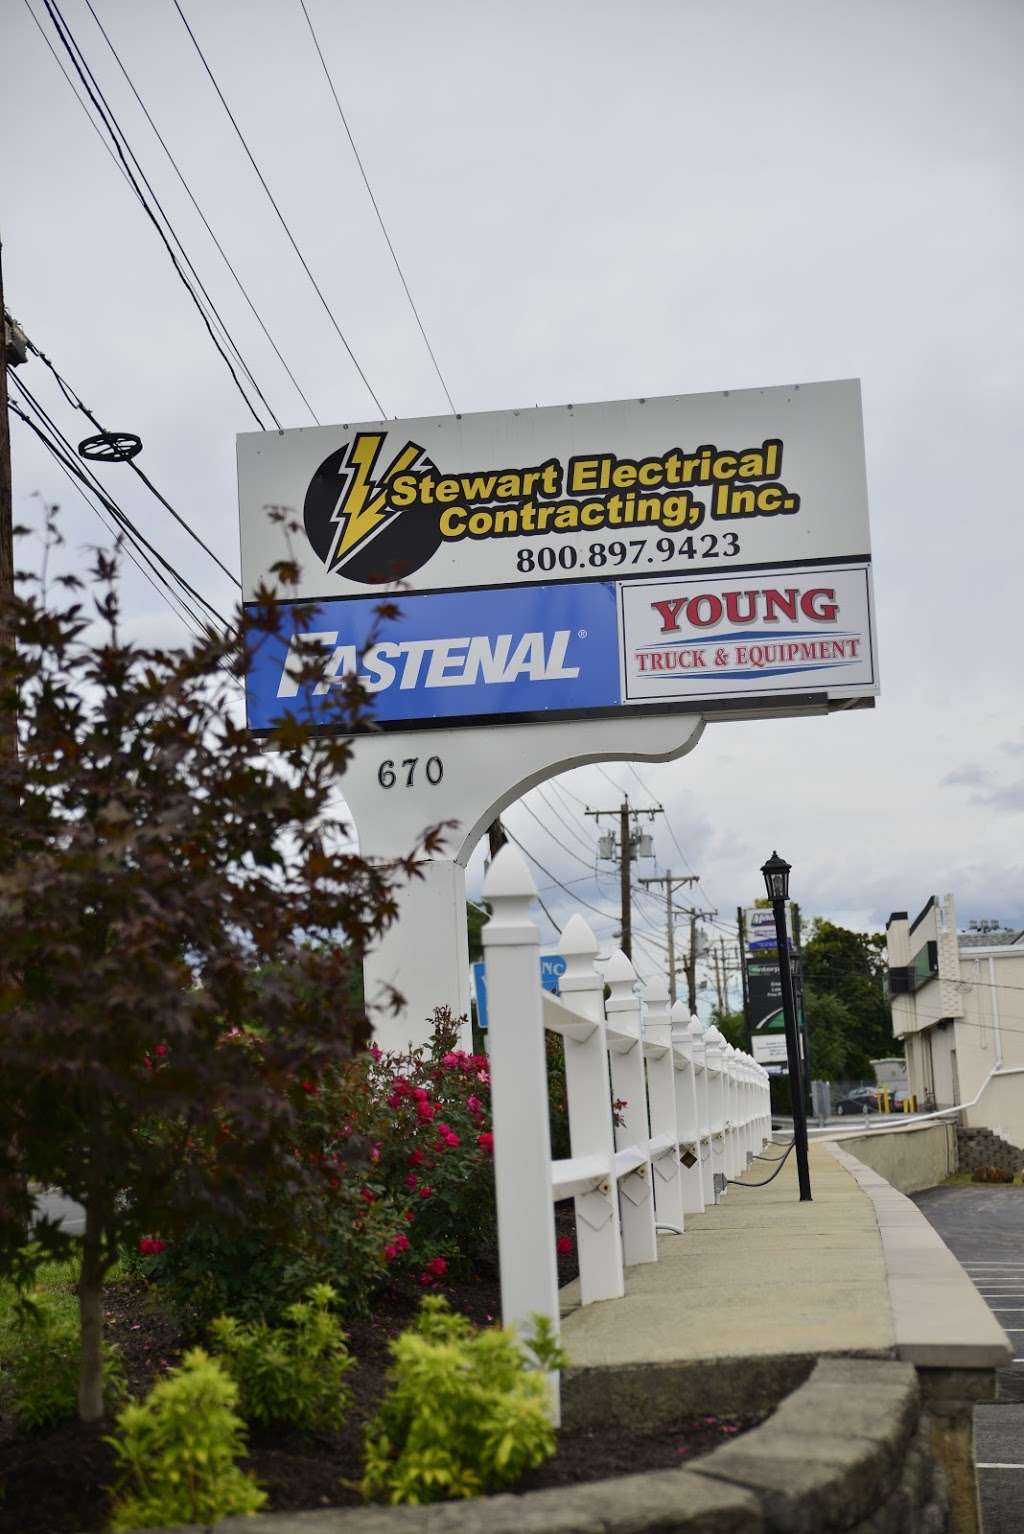 Young Truck & Equipment | 670 S Union St, Lawrence, MA 01843 | Phone: (603) 973-0809